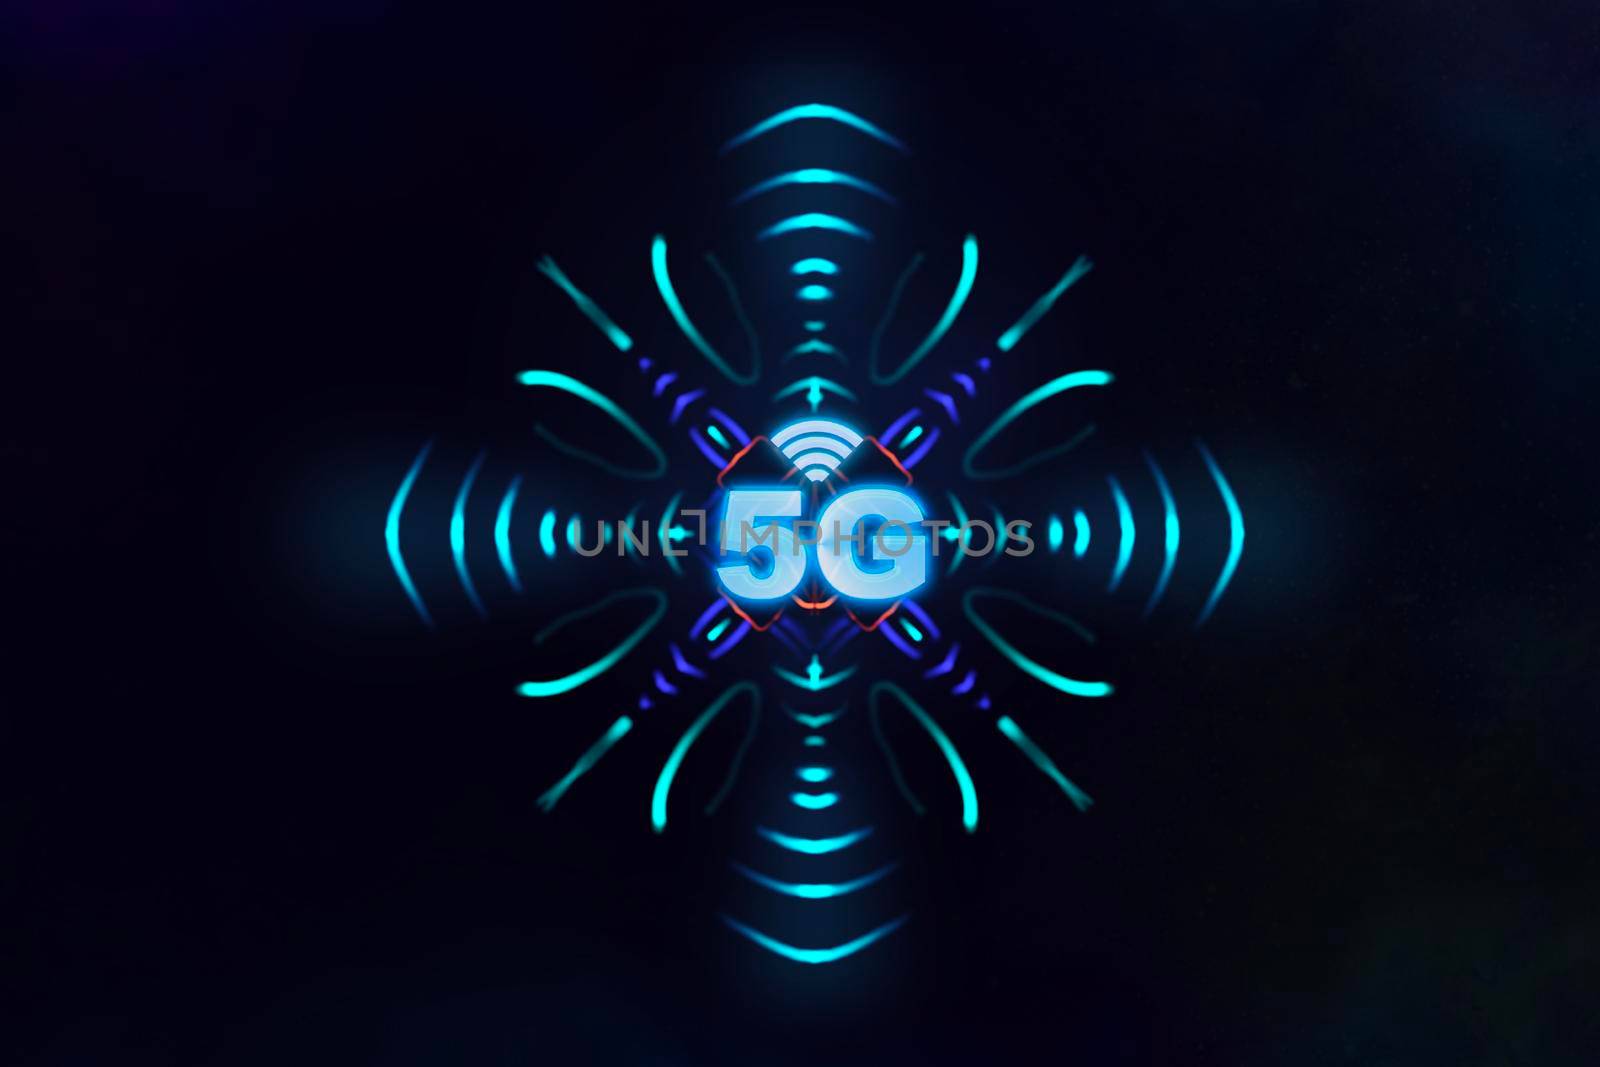 5G technology concept design with illustration 